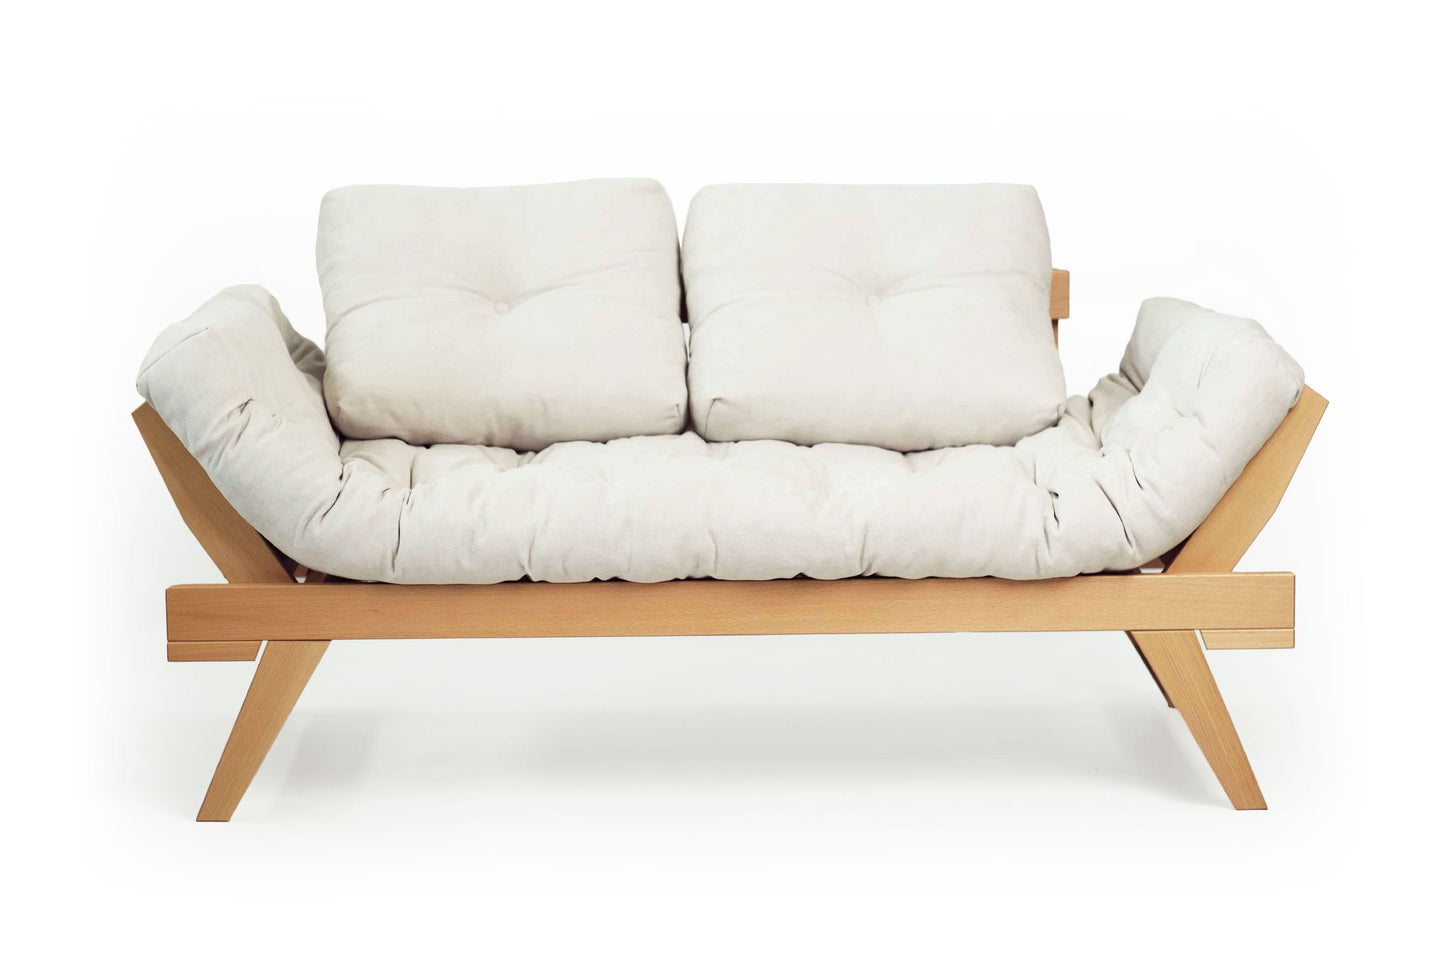 Long Beach Natural Chemical-Free Daybed Sleeper